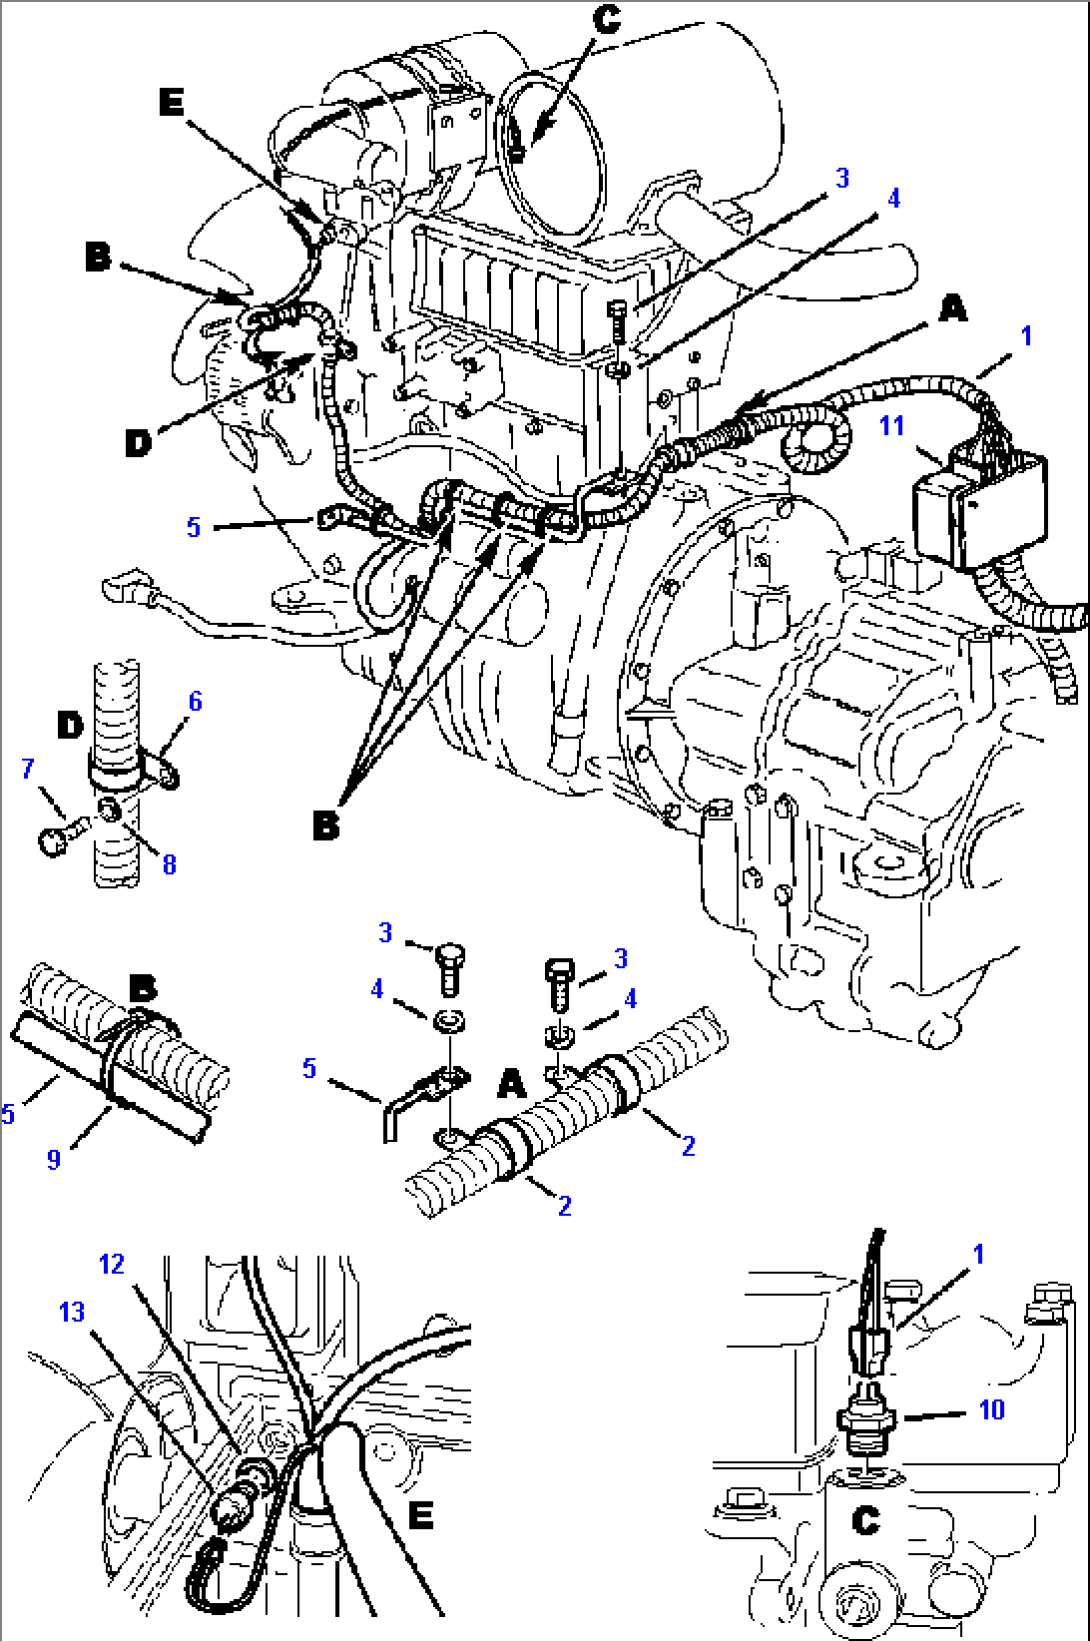 FIG. E1501-01A1 ELECTRICAL SYSTEM - ENGINE WIRING